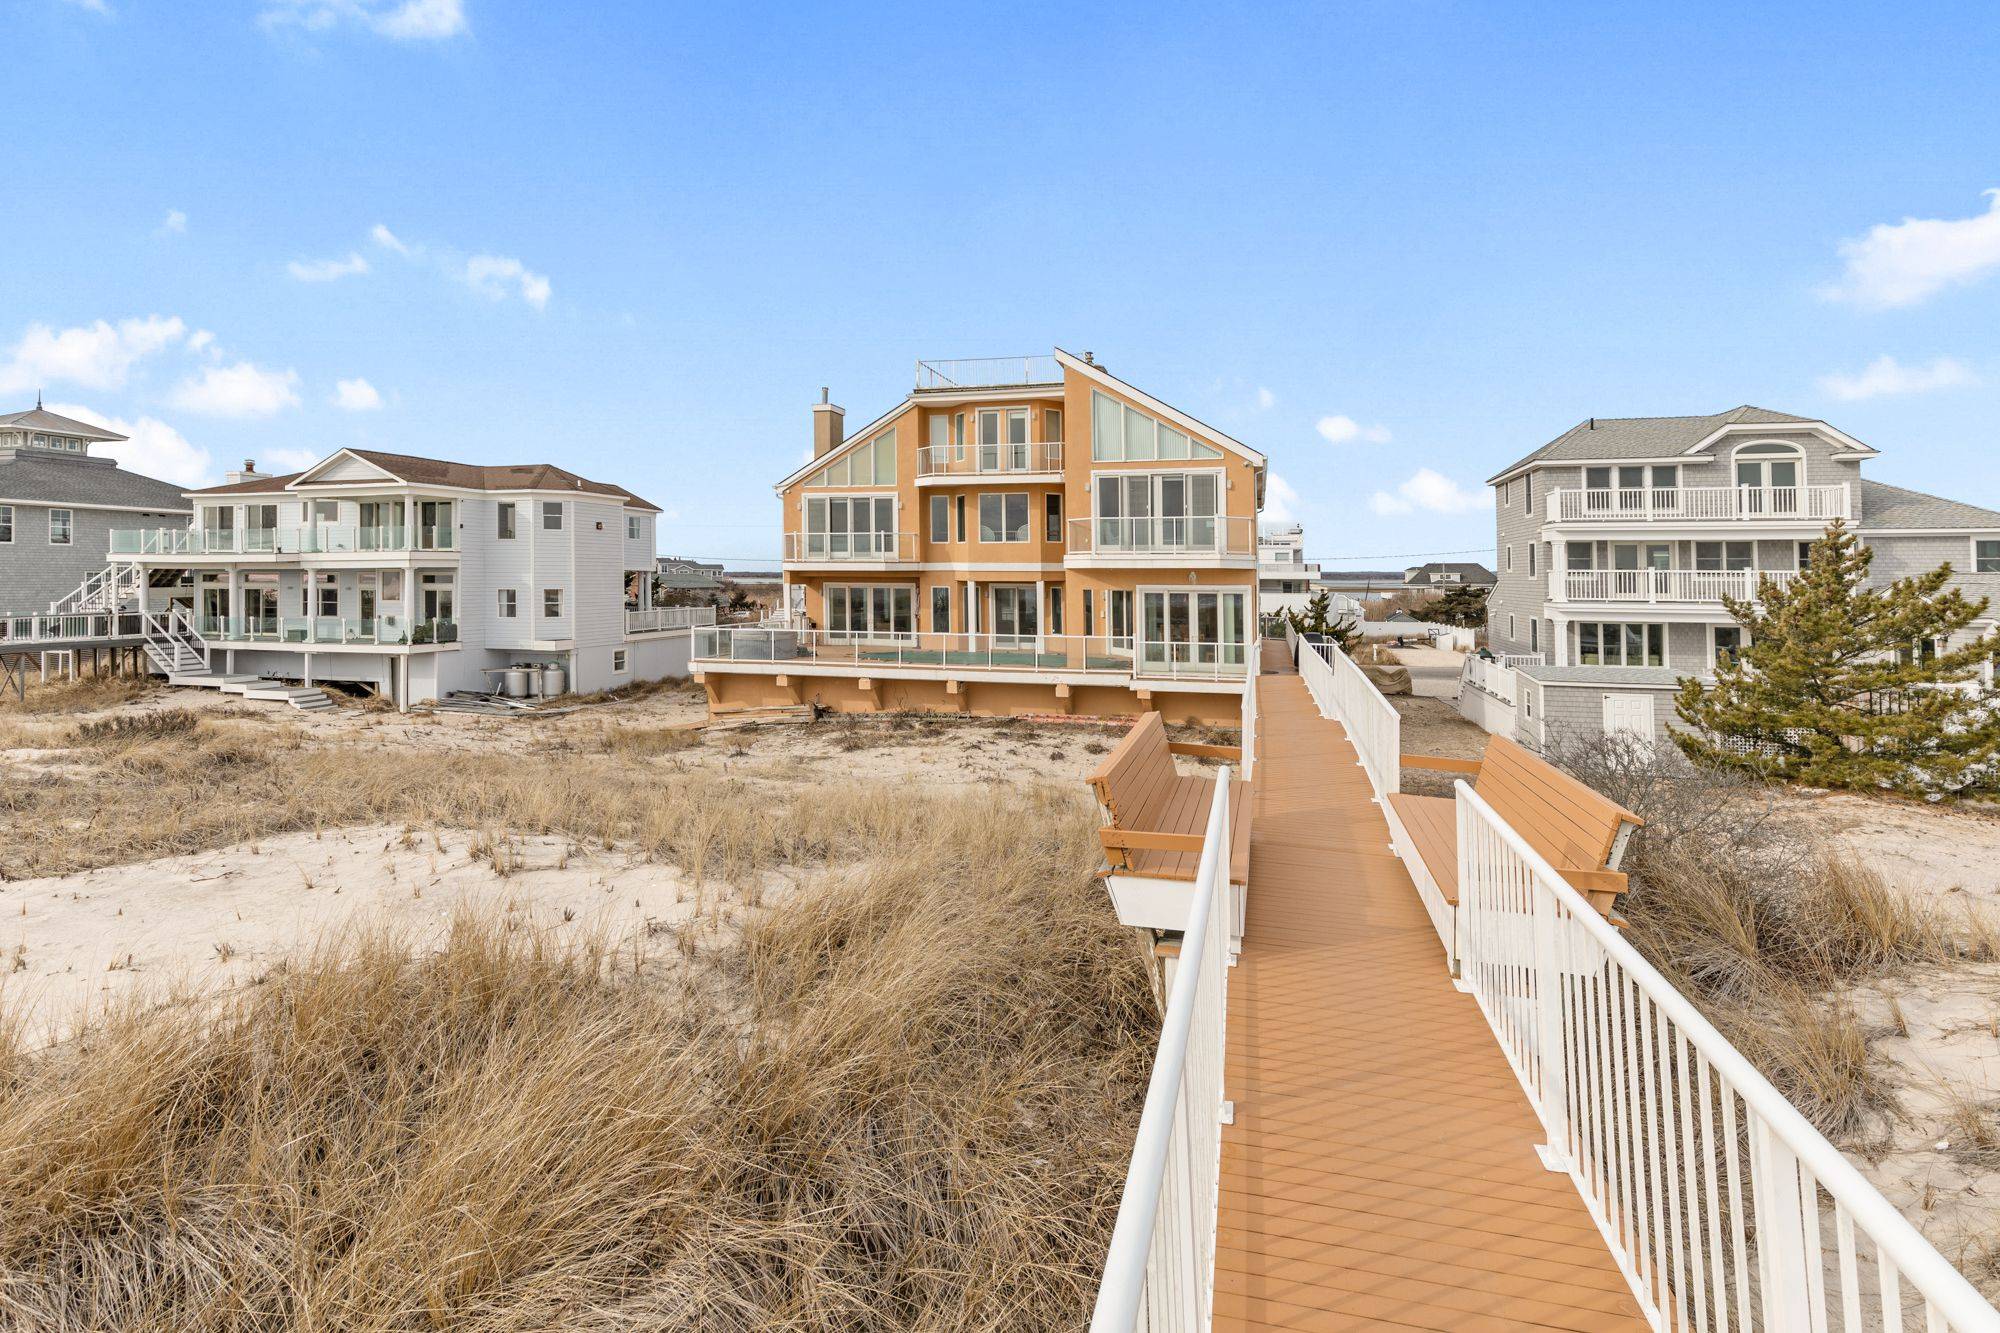 8 Bedroom Oceanfront Palace on Dune Rd